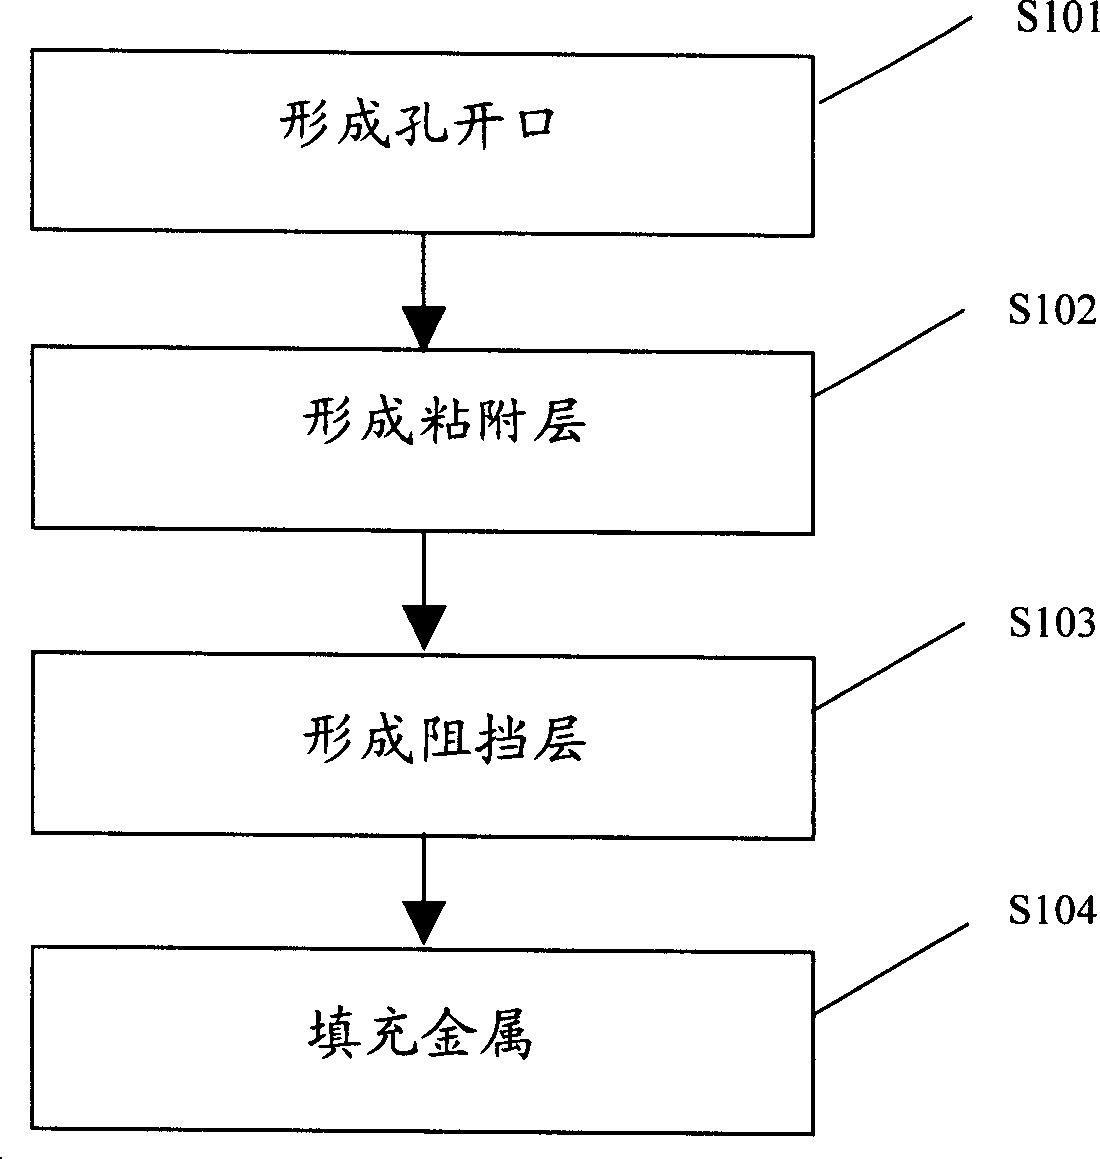 Contact hole filling method